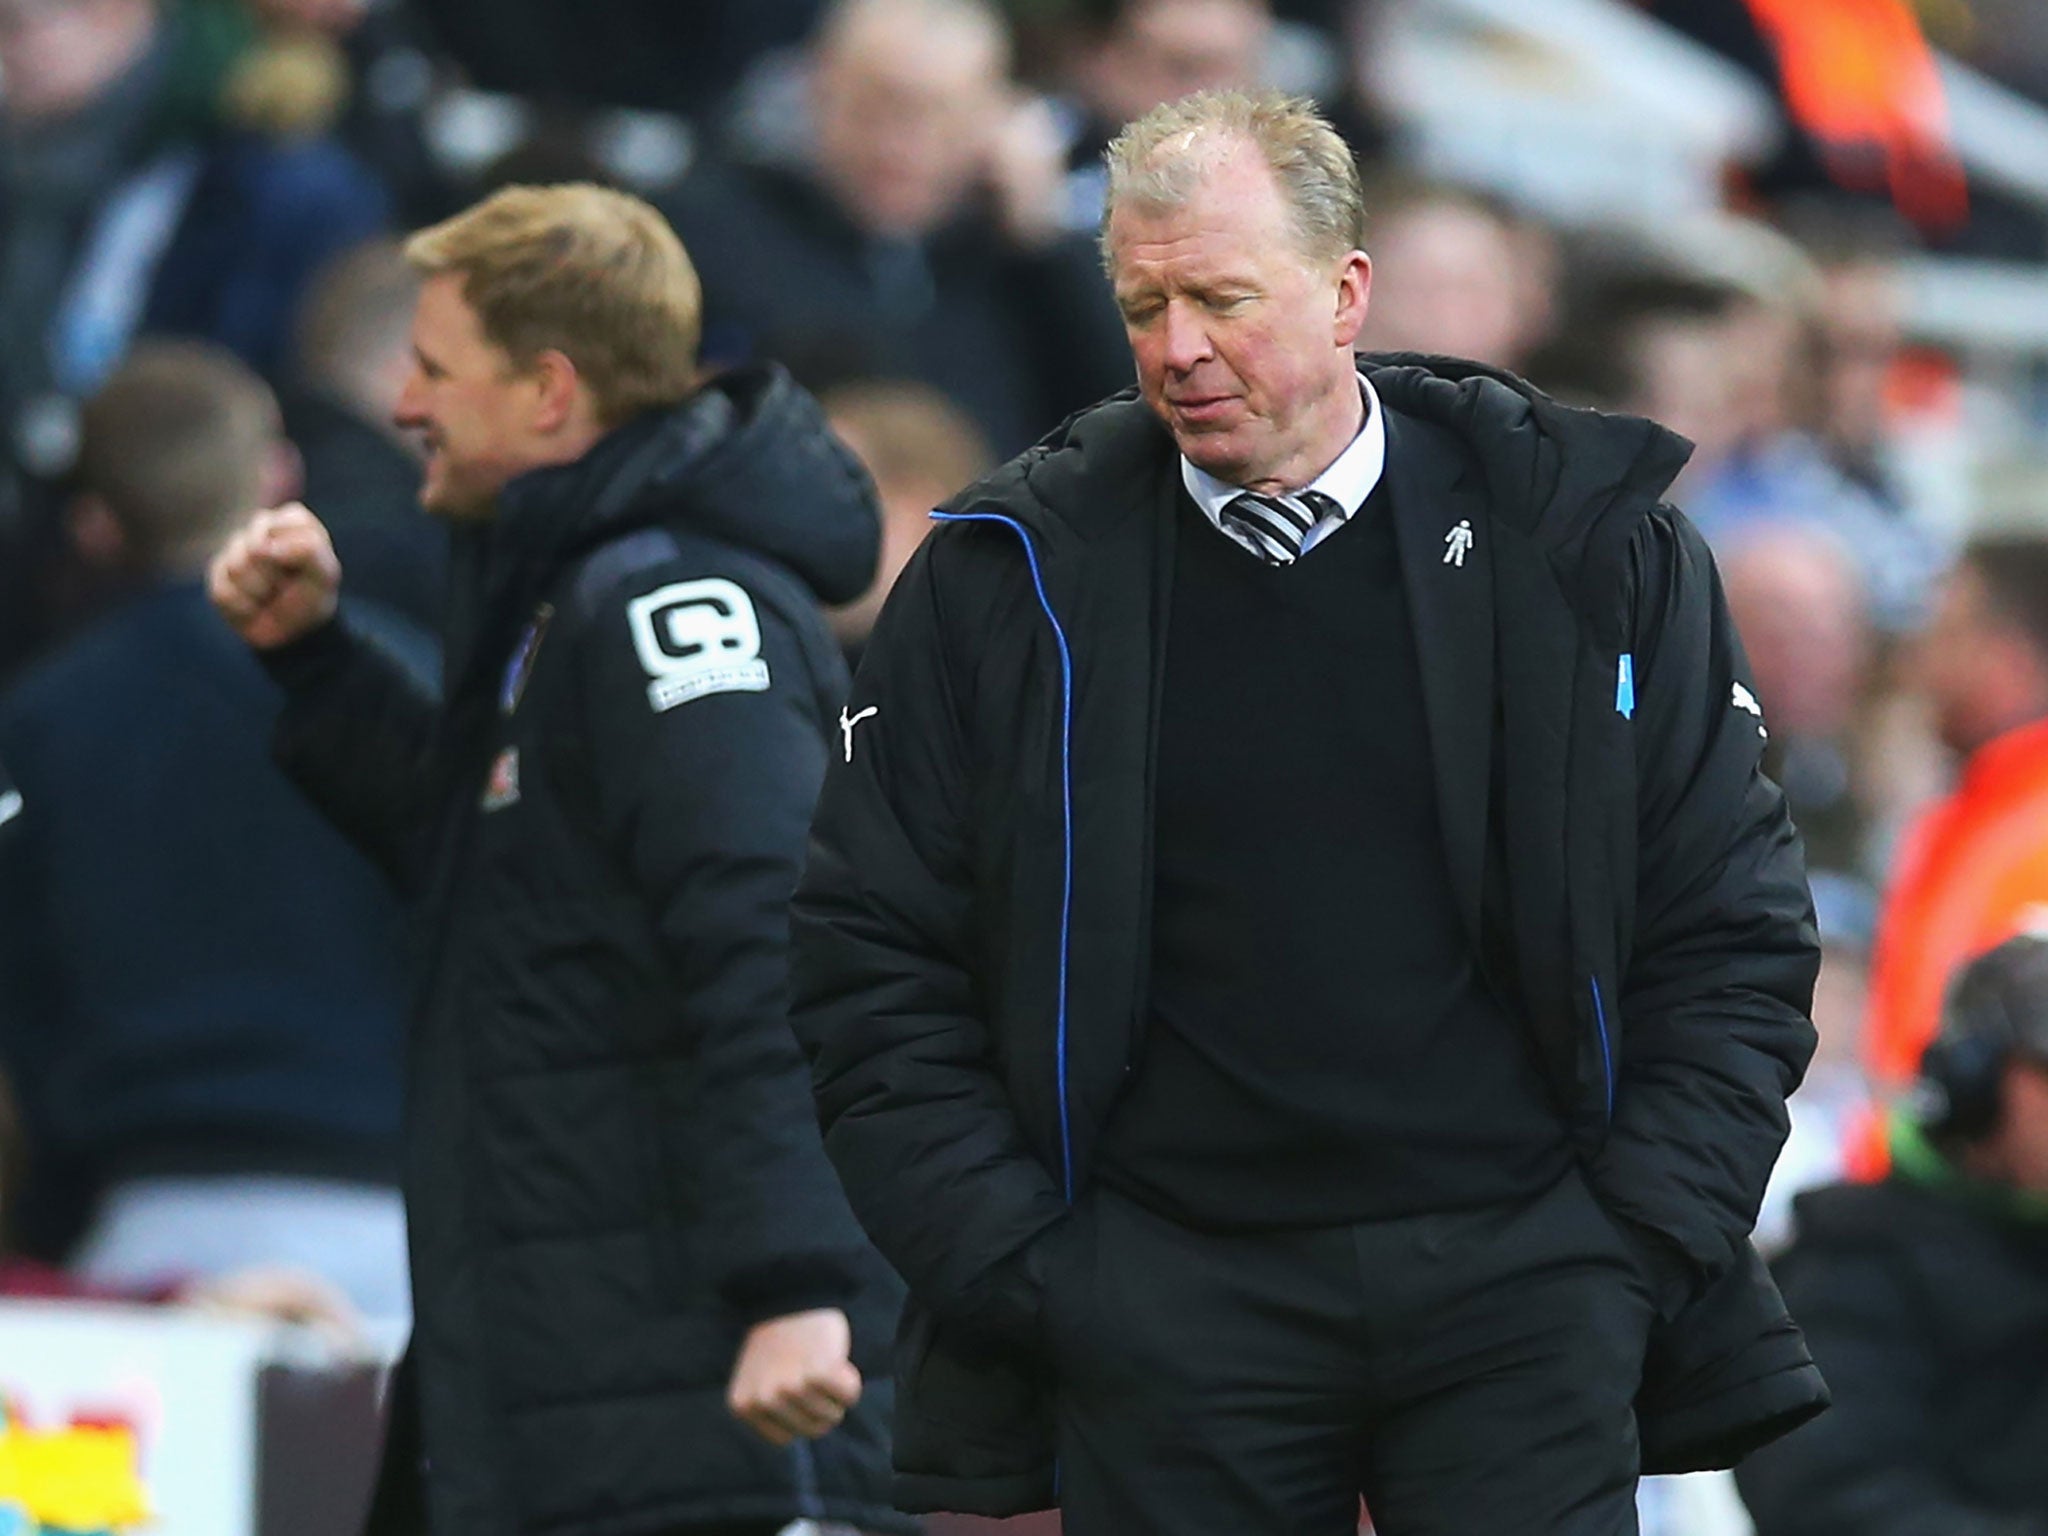 Newcastle United manager Steve McClaren reacts to Bournemouth scoring a goal